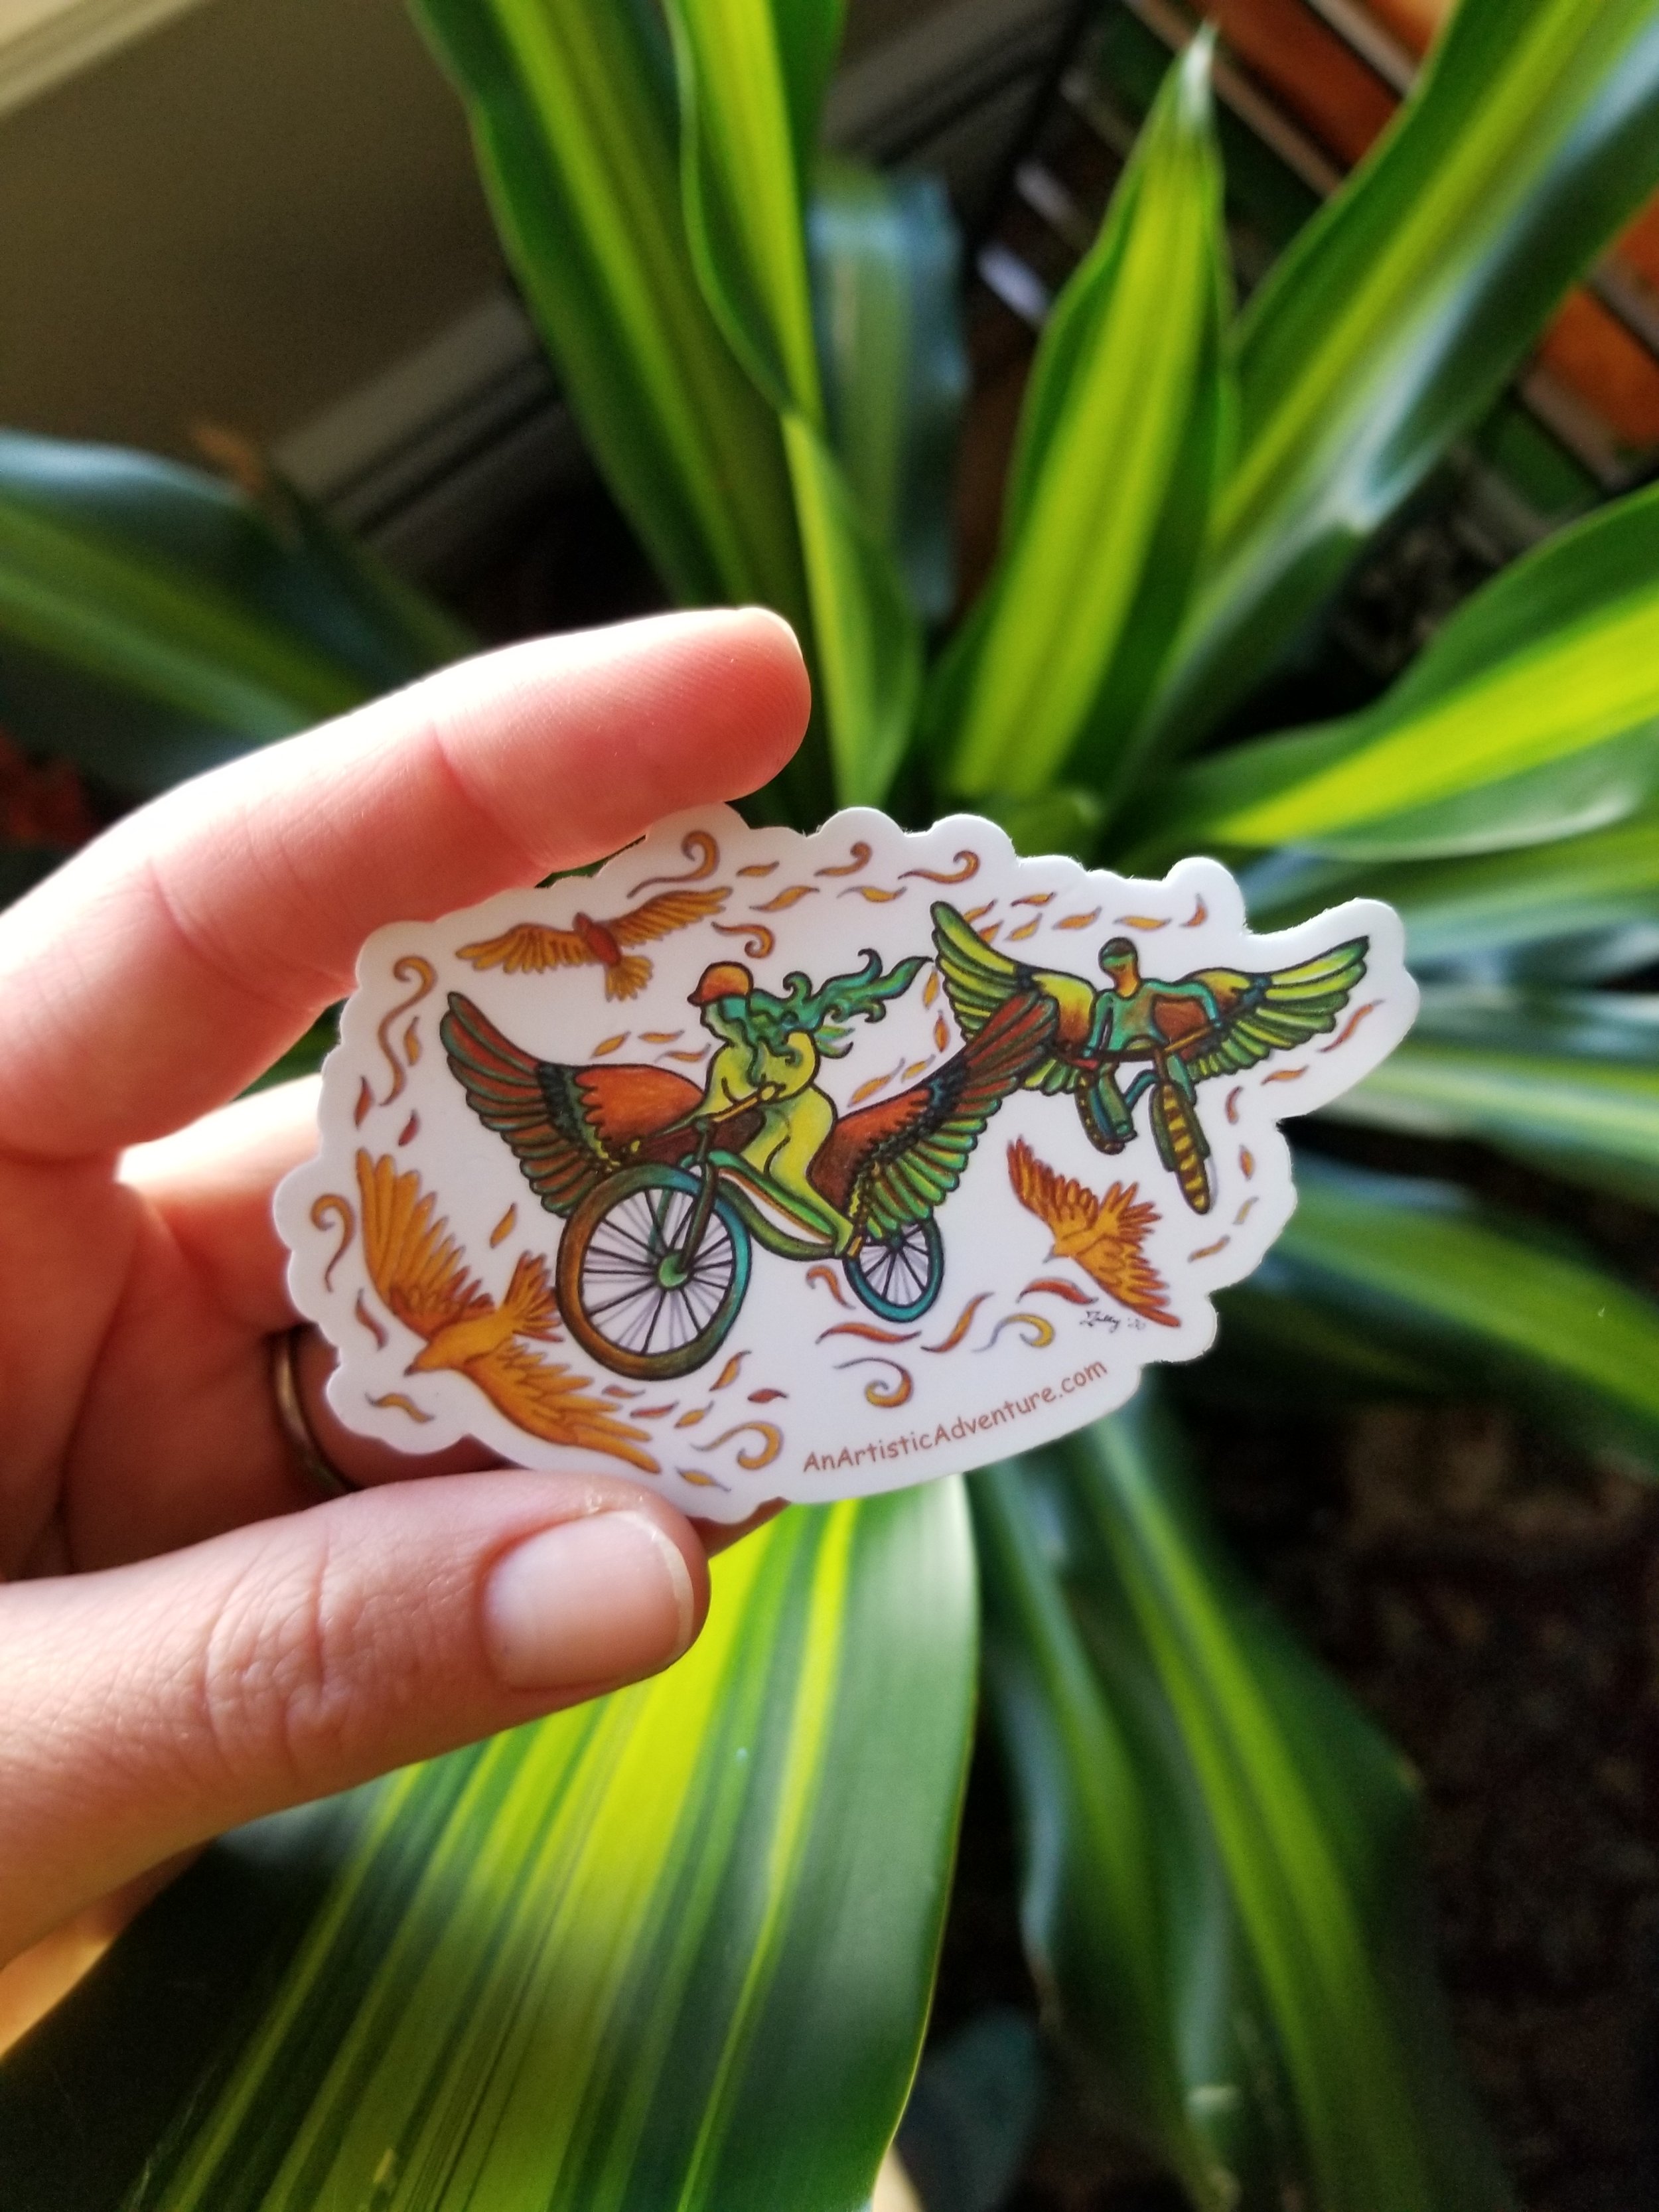 flying-bikes-sticker-buy-stickers-from-independent-artists-unique-artisan-stickers.jpg